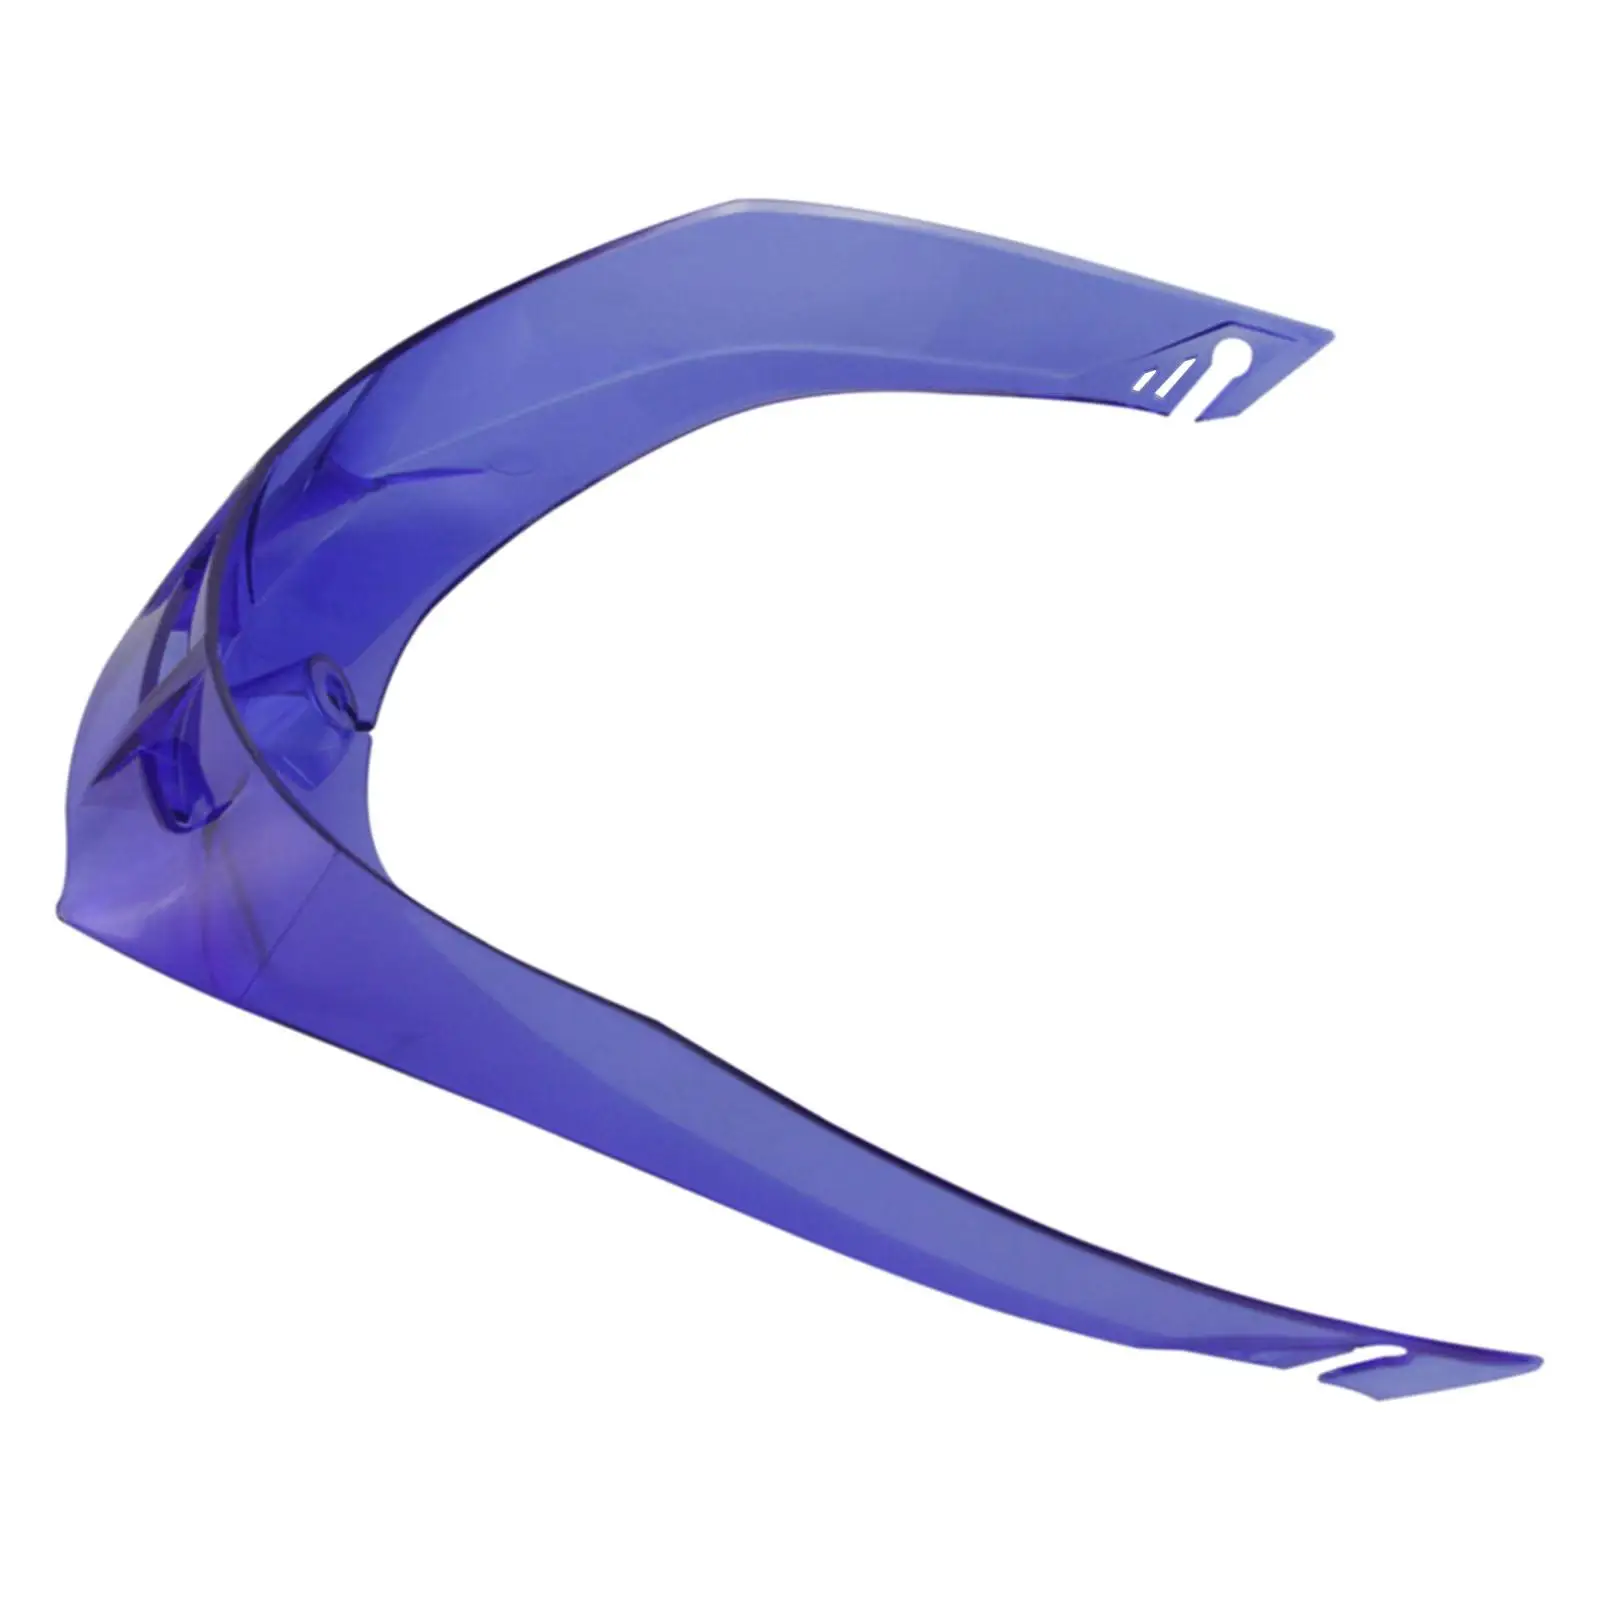  Helmet Big Tail Spoiler Replacement PC Trim for   for Pista